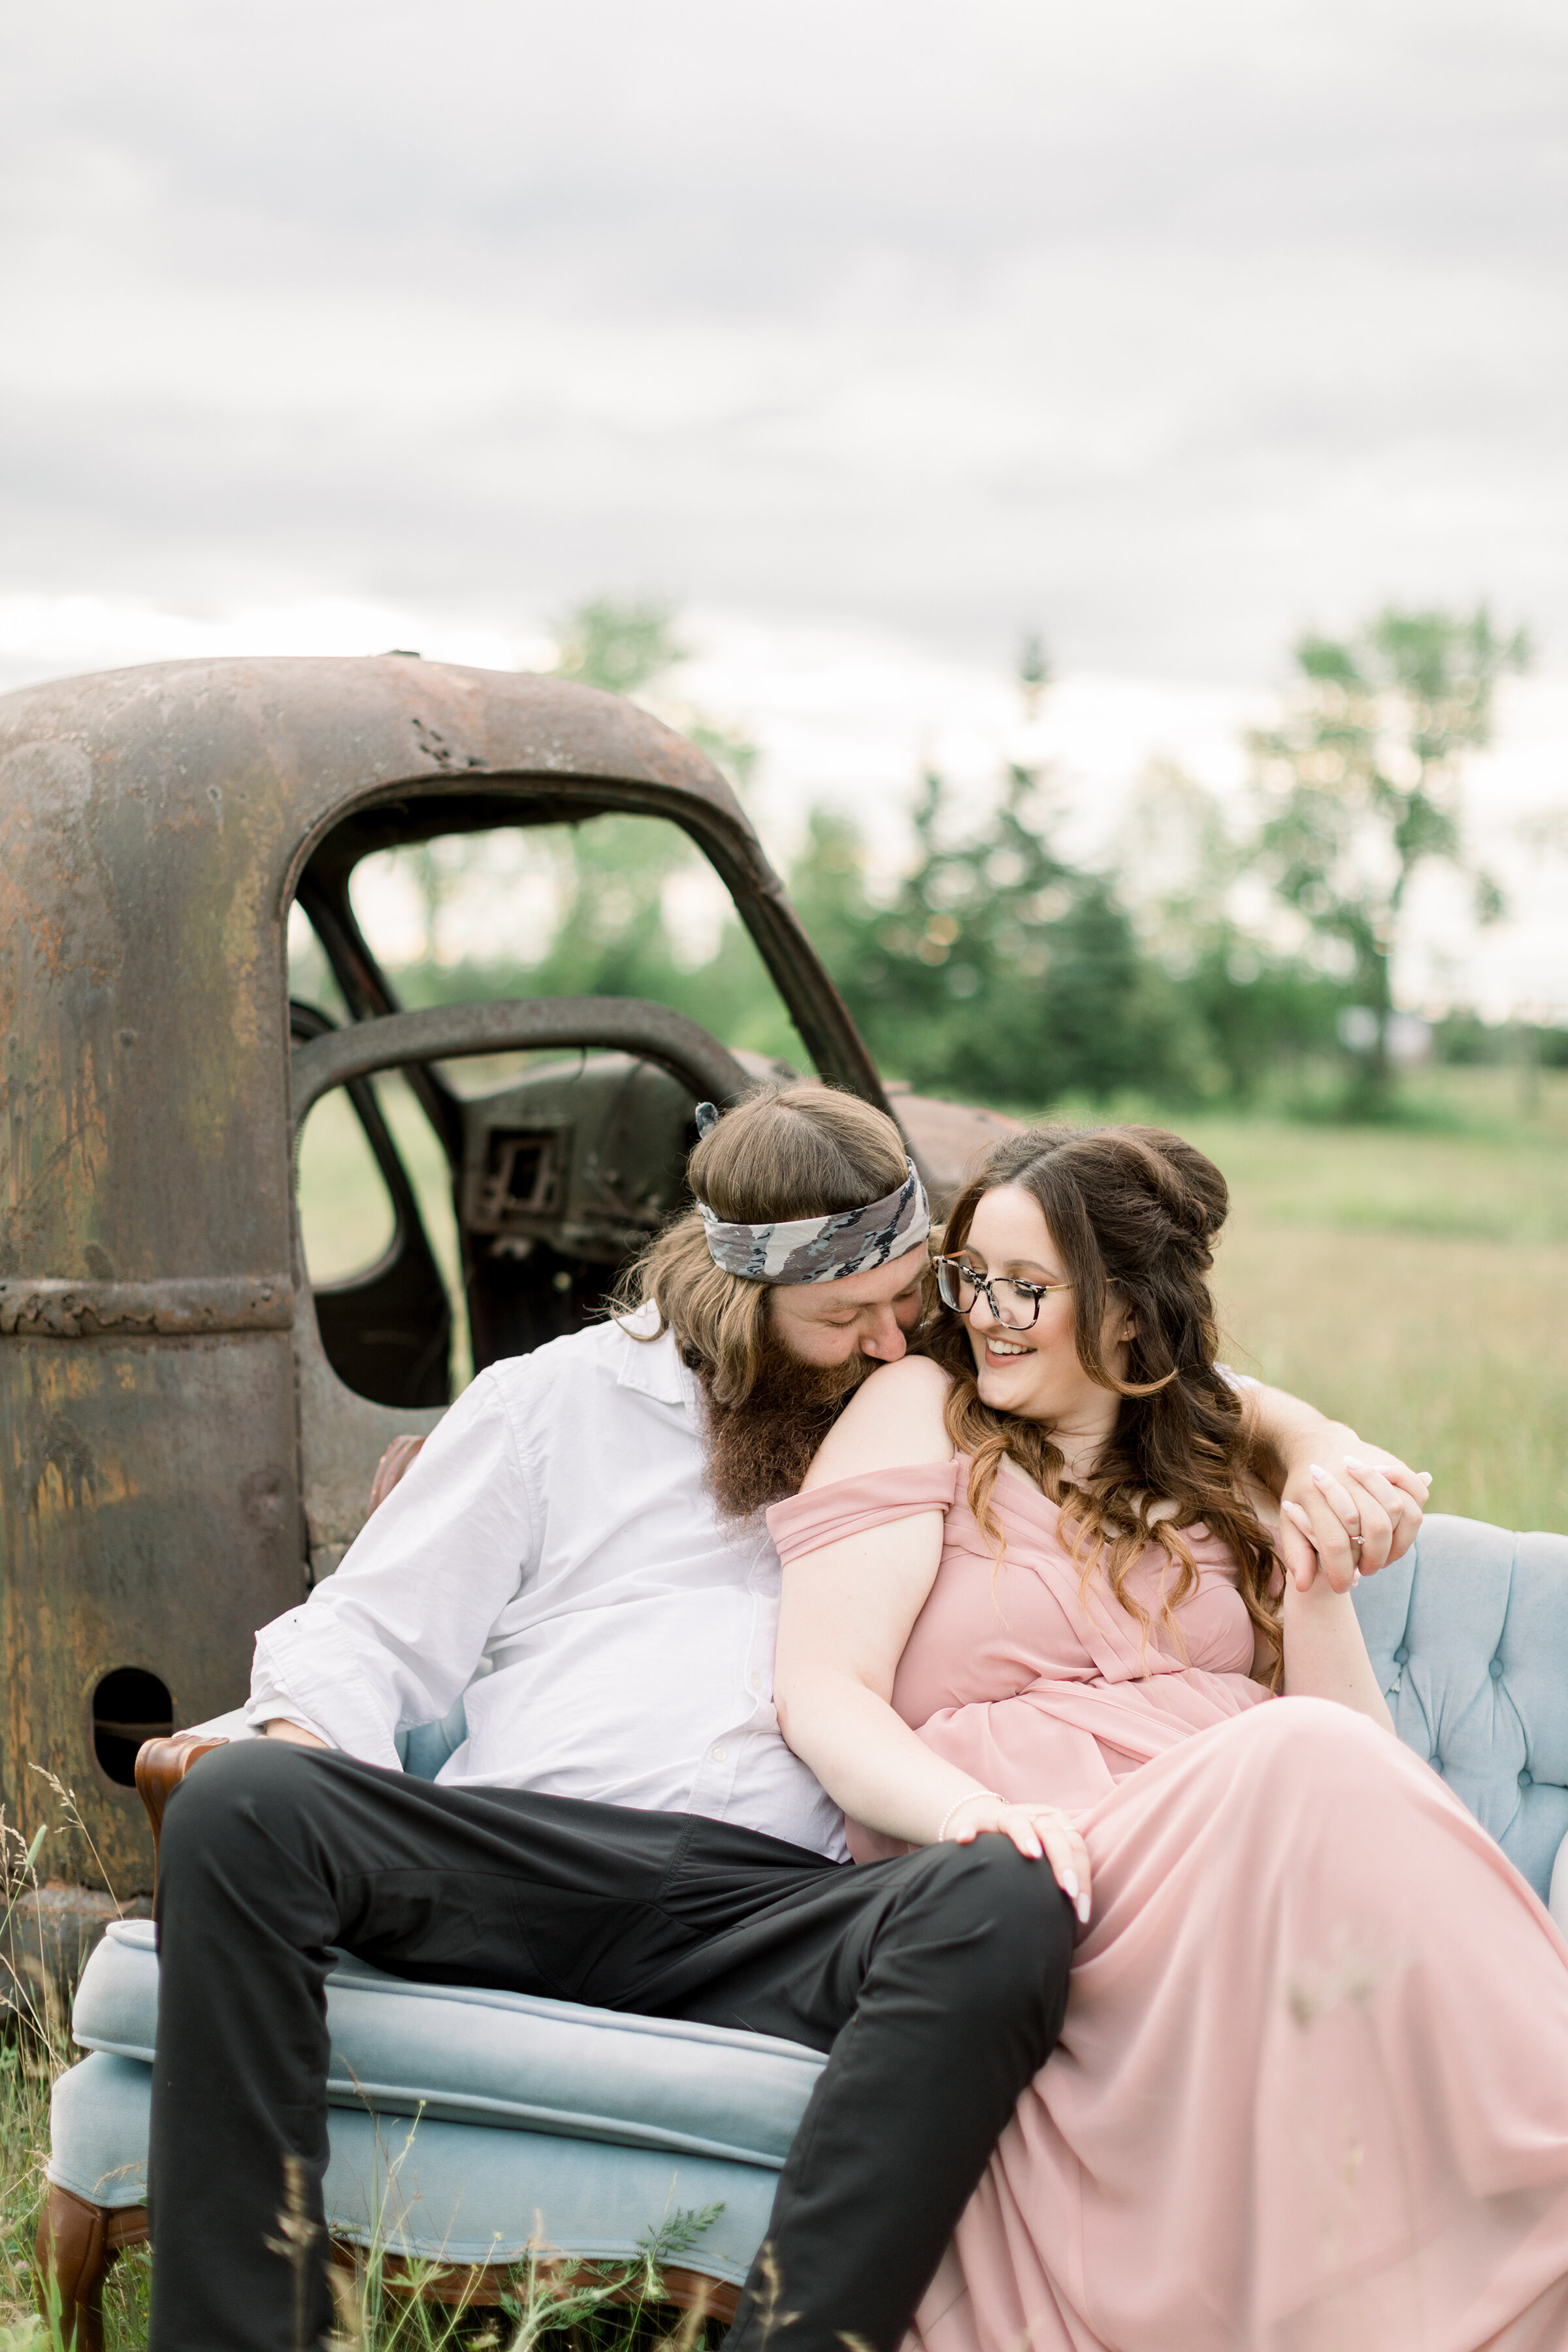  A loving couple sit together on a blue tufted couch by a rusting old truck in an awesome engagement session by Chelsea Mason Photography in Smith Falls, Ontario Canada. Sitting couple pose inspiration photo shoot prop goals outdoor photo shoot inspi